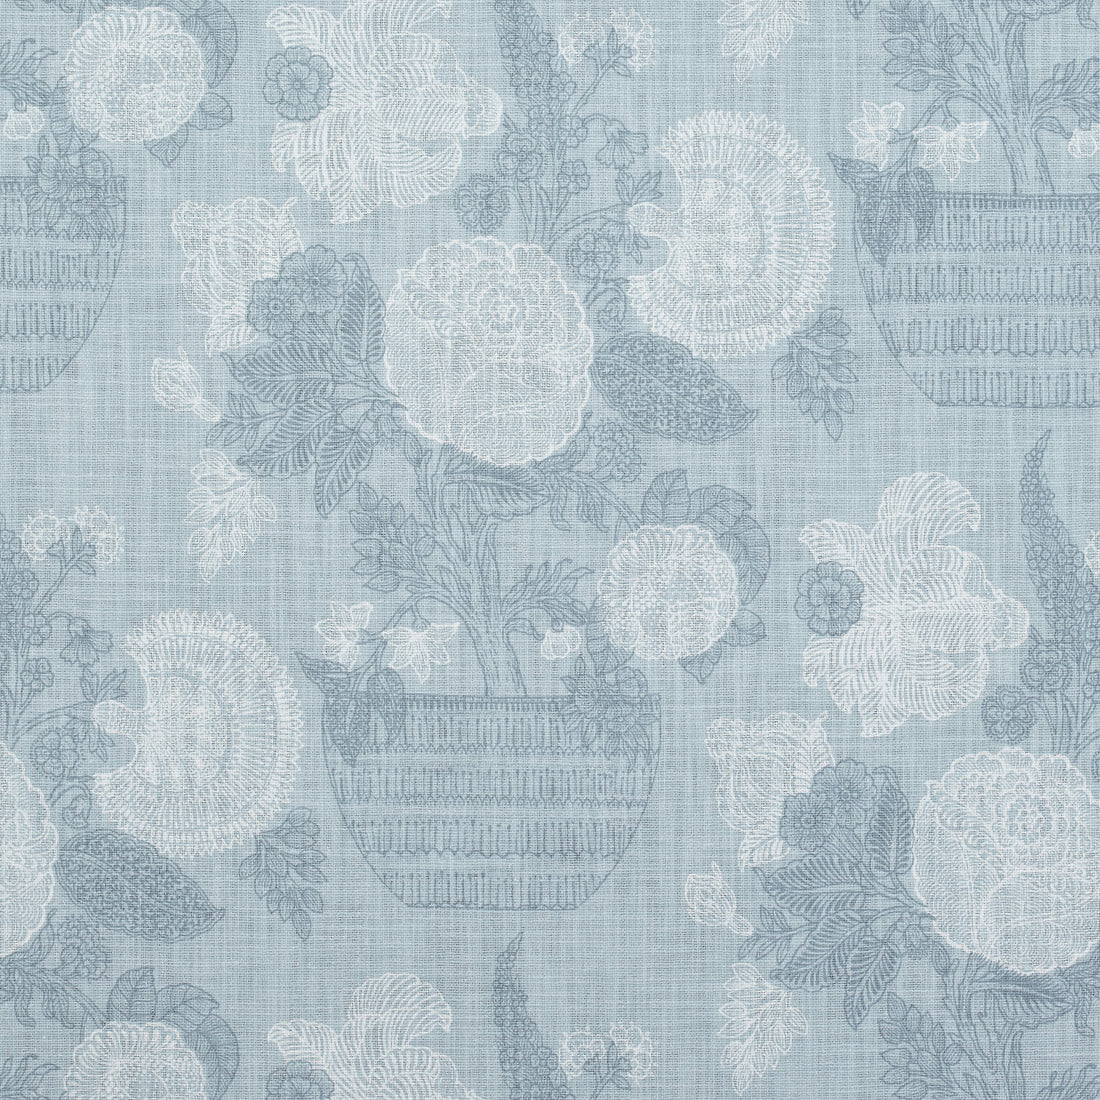 Tullamore fabric in light blue color - pattern number F972591 - by Thibaut in the Chestnut Hill collection